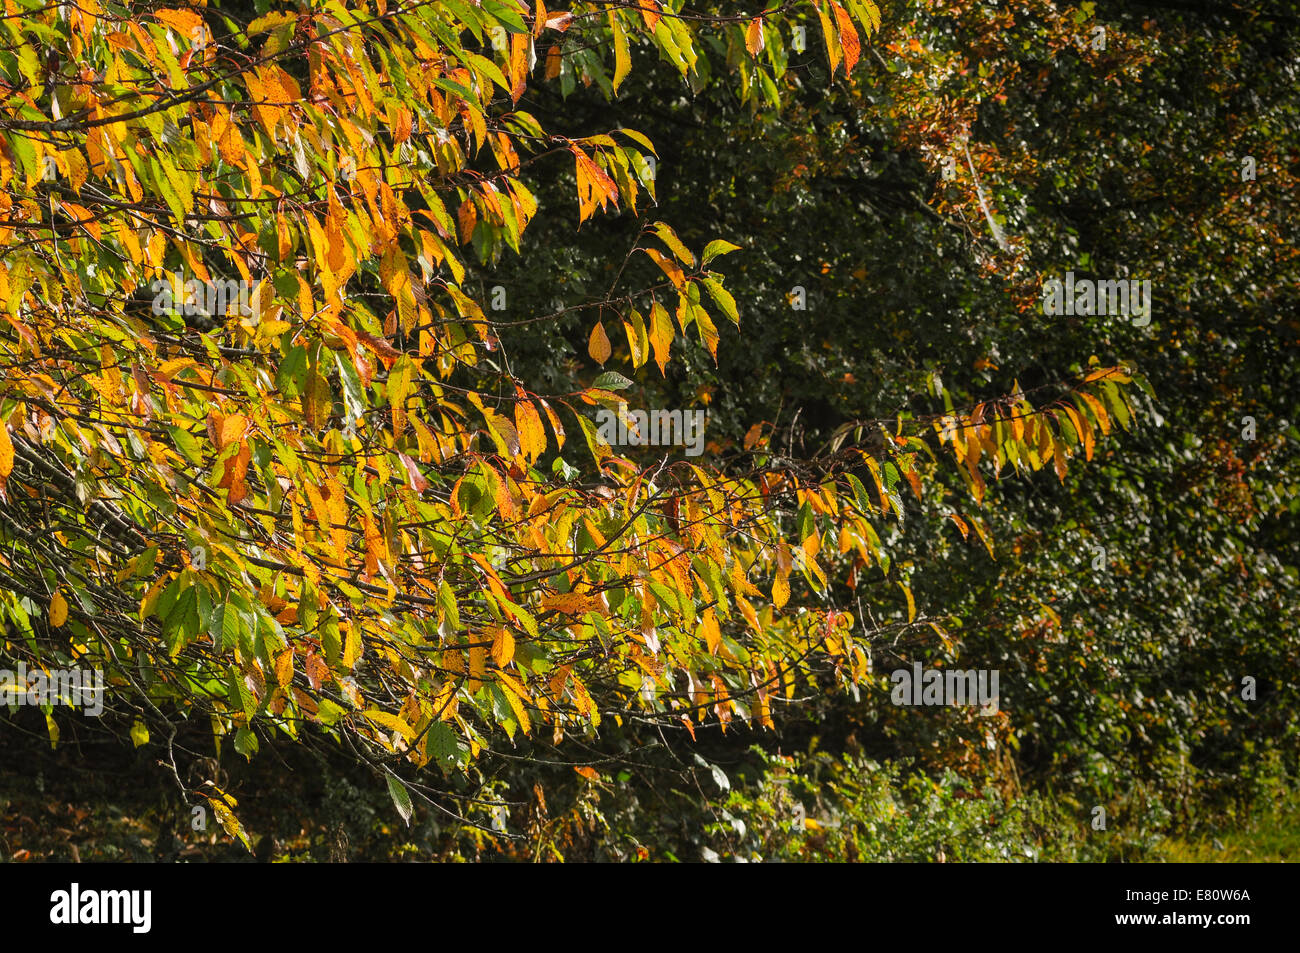 Ticehurst, East Sussex, UK. 28th September, 2014.Early morning mist and dewy cobwebs on an early morning walk near Bewl Water on the Kent and Sussex border. Autumn colors appearing. David Burr/Alamy Live  News. Stock Photo